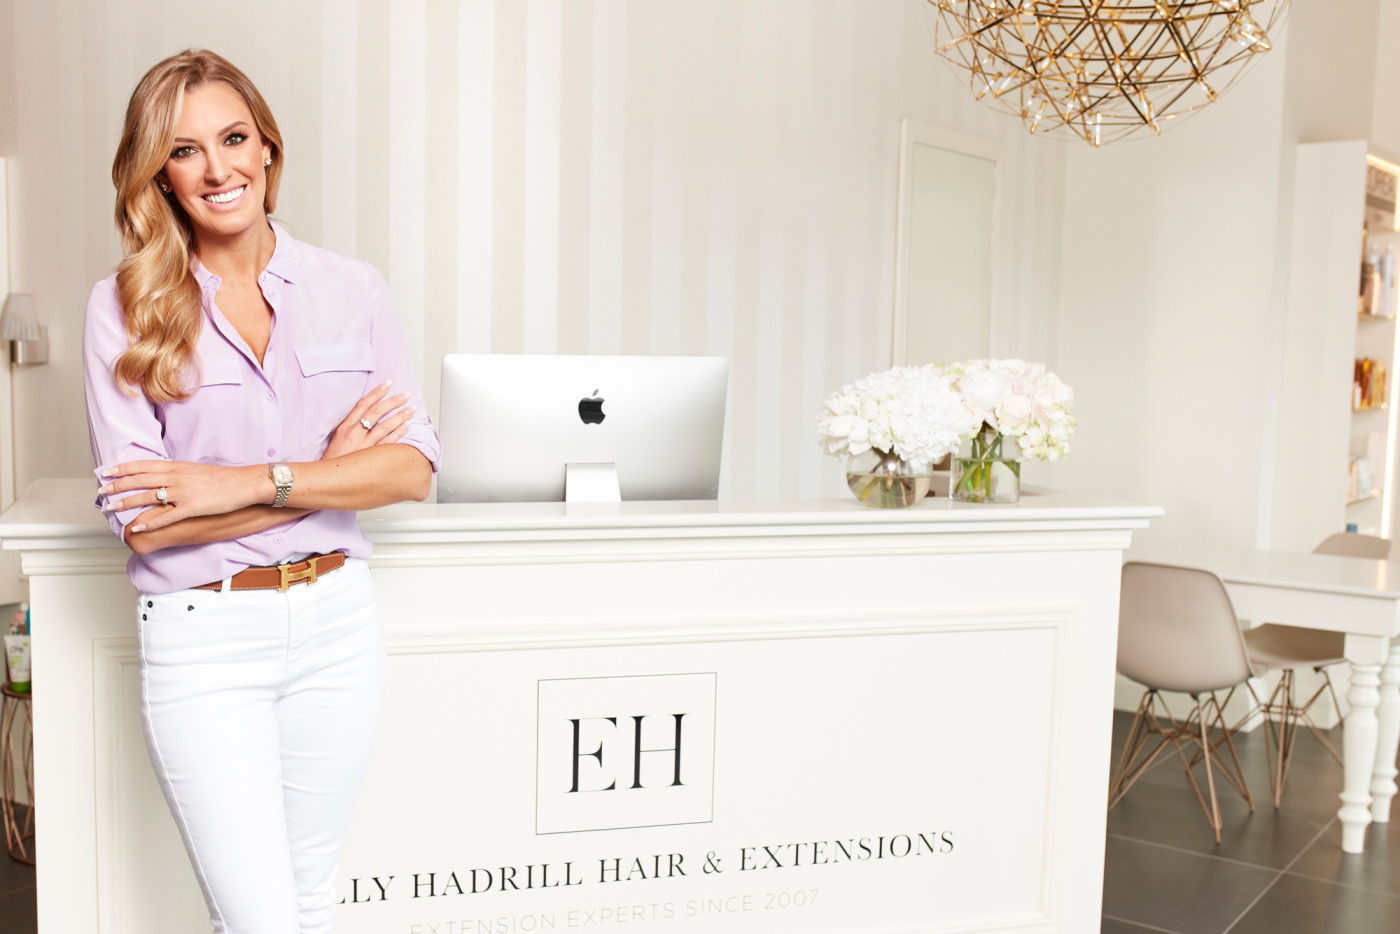 Emily Haddrill Hair Extensions